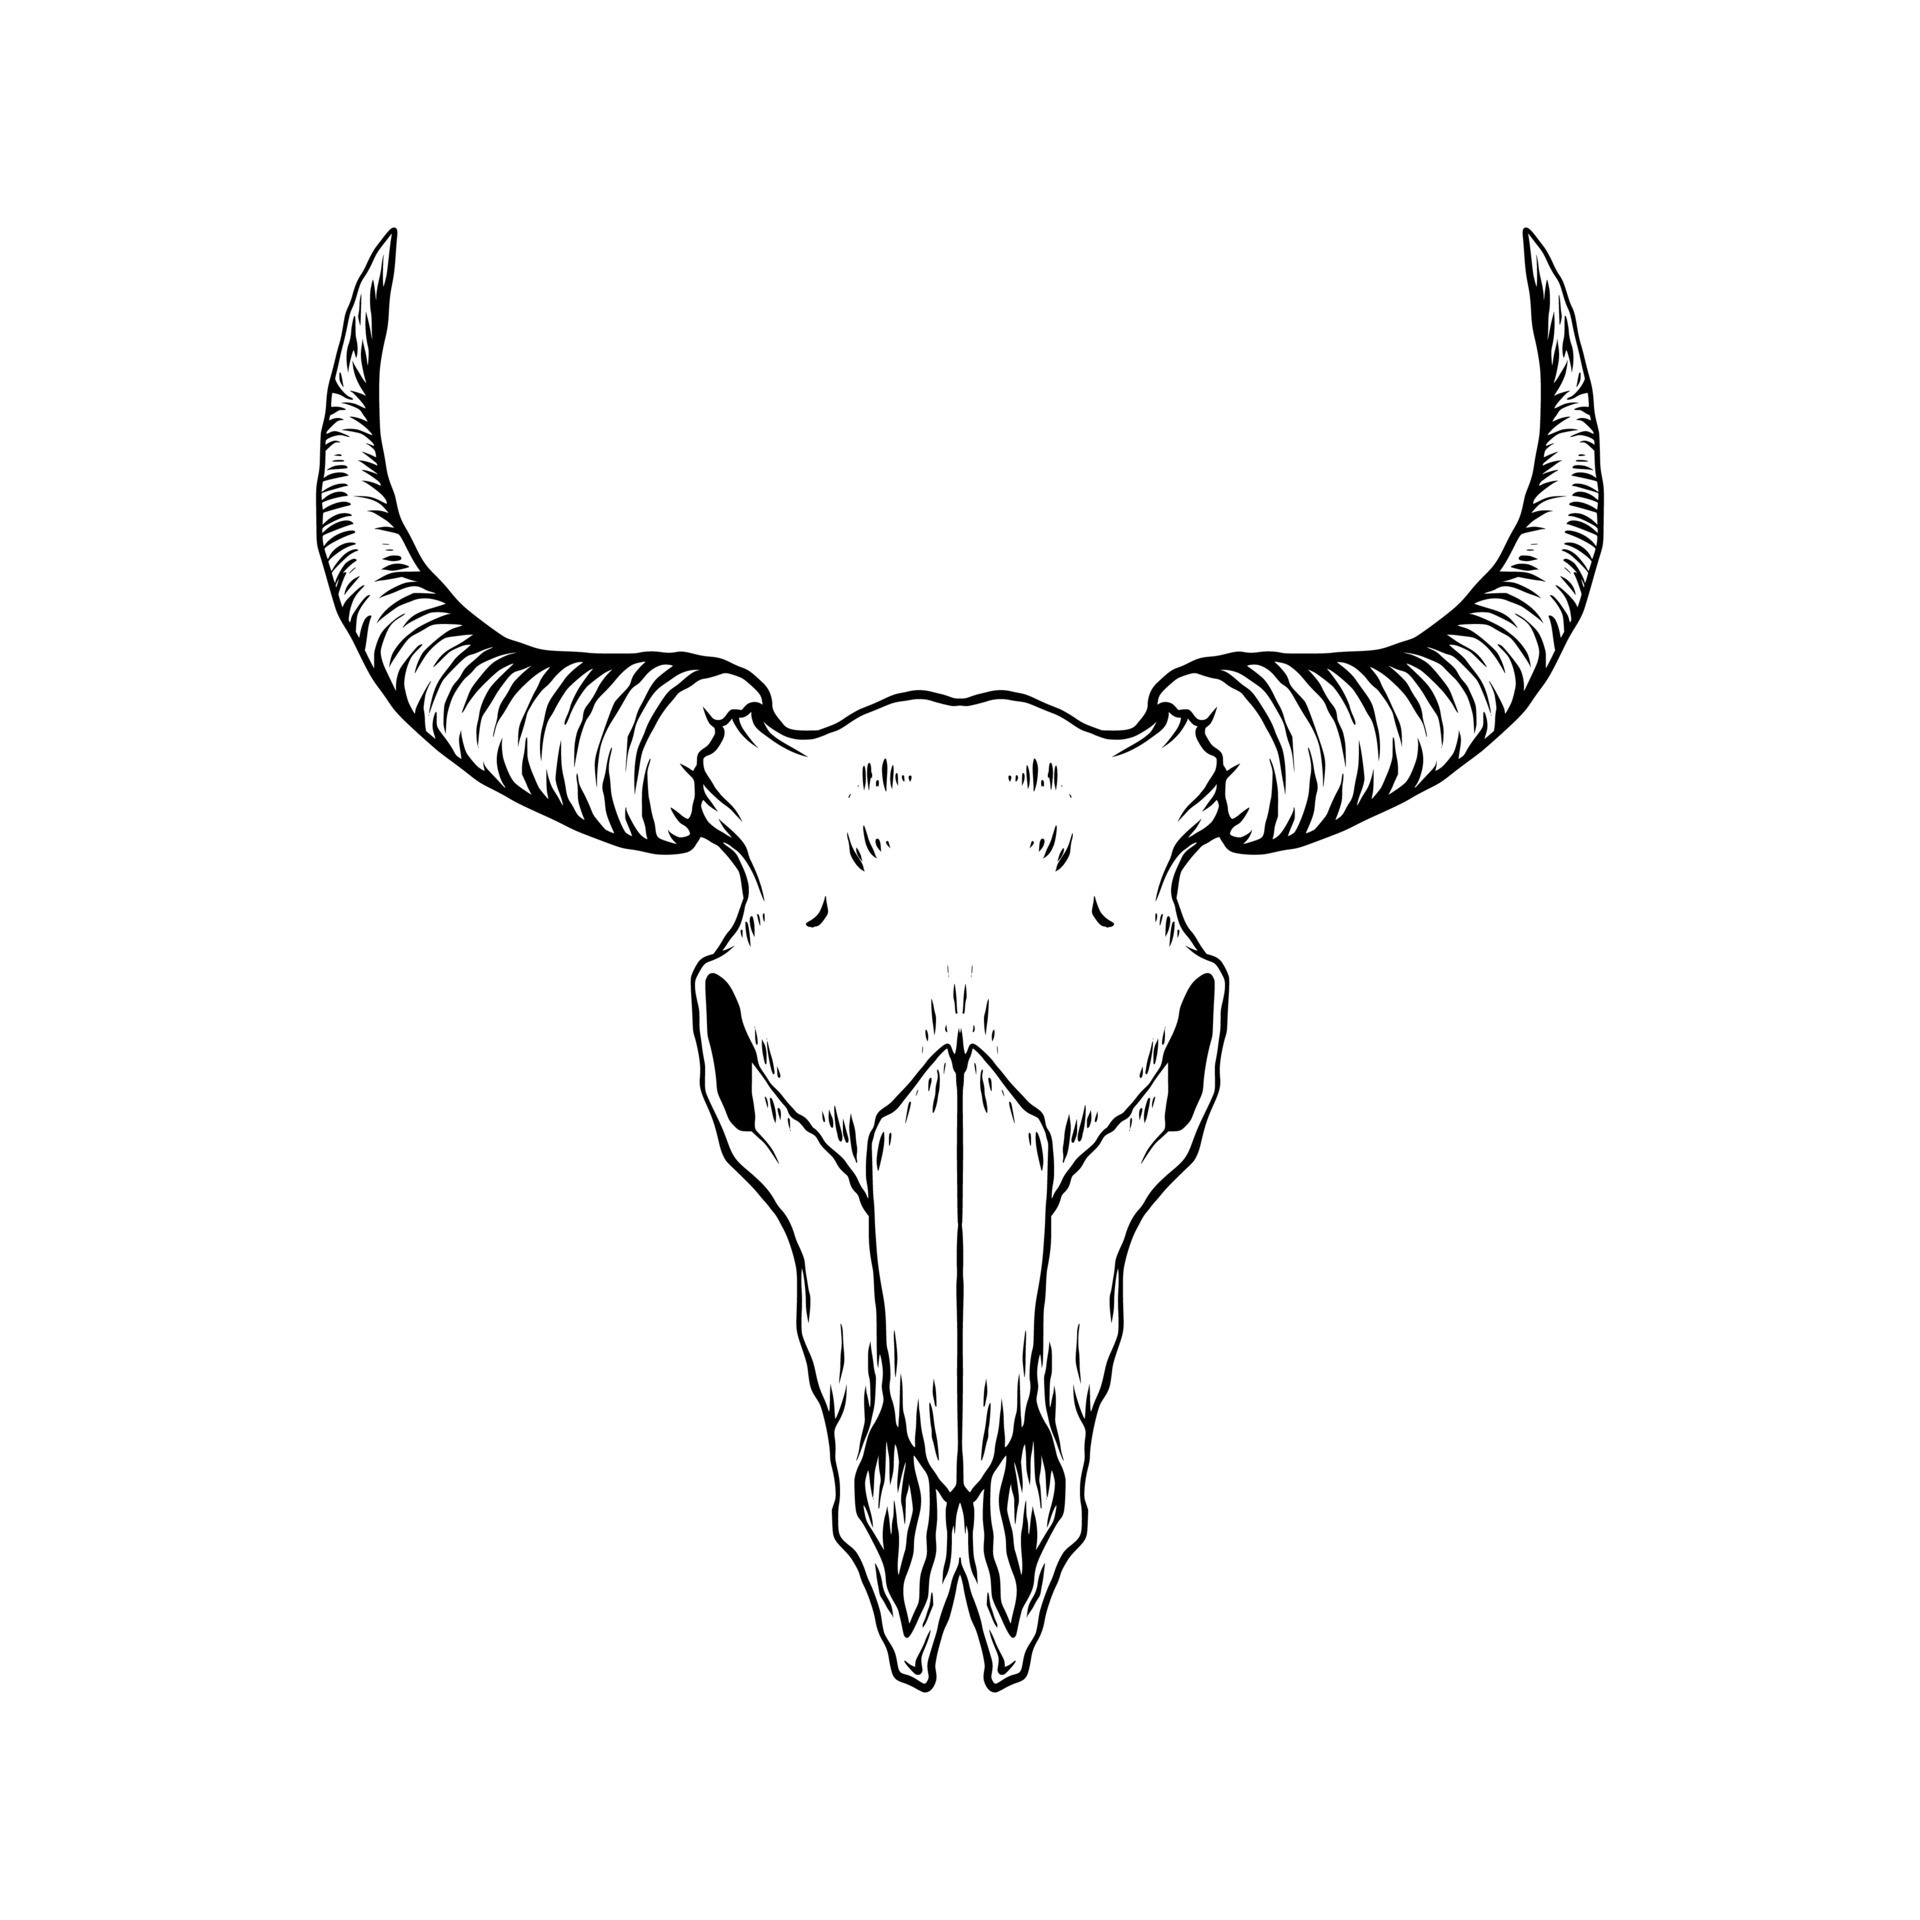 Bull skull drawing easy | How to draw A Bull skull step by step | outline  drawings | art janag - YouTube